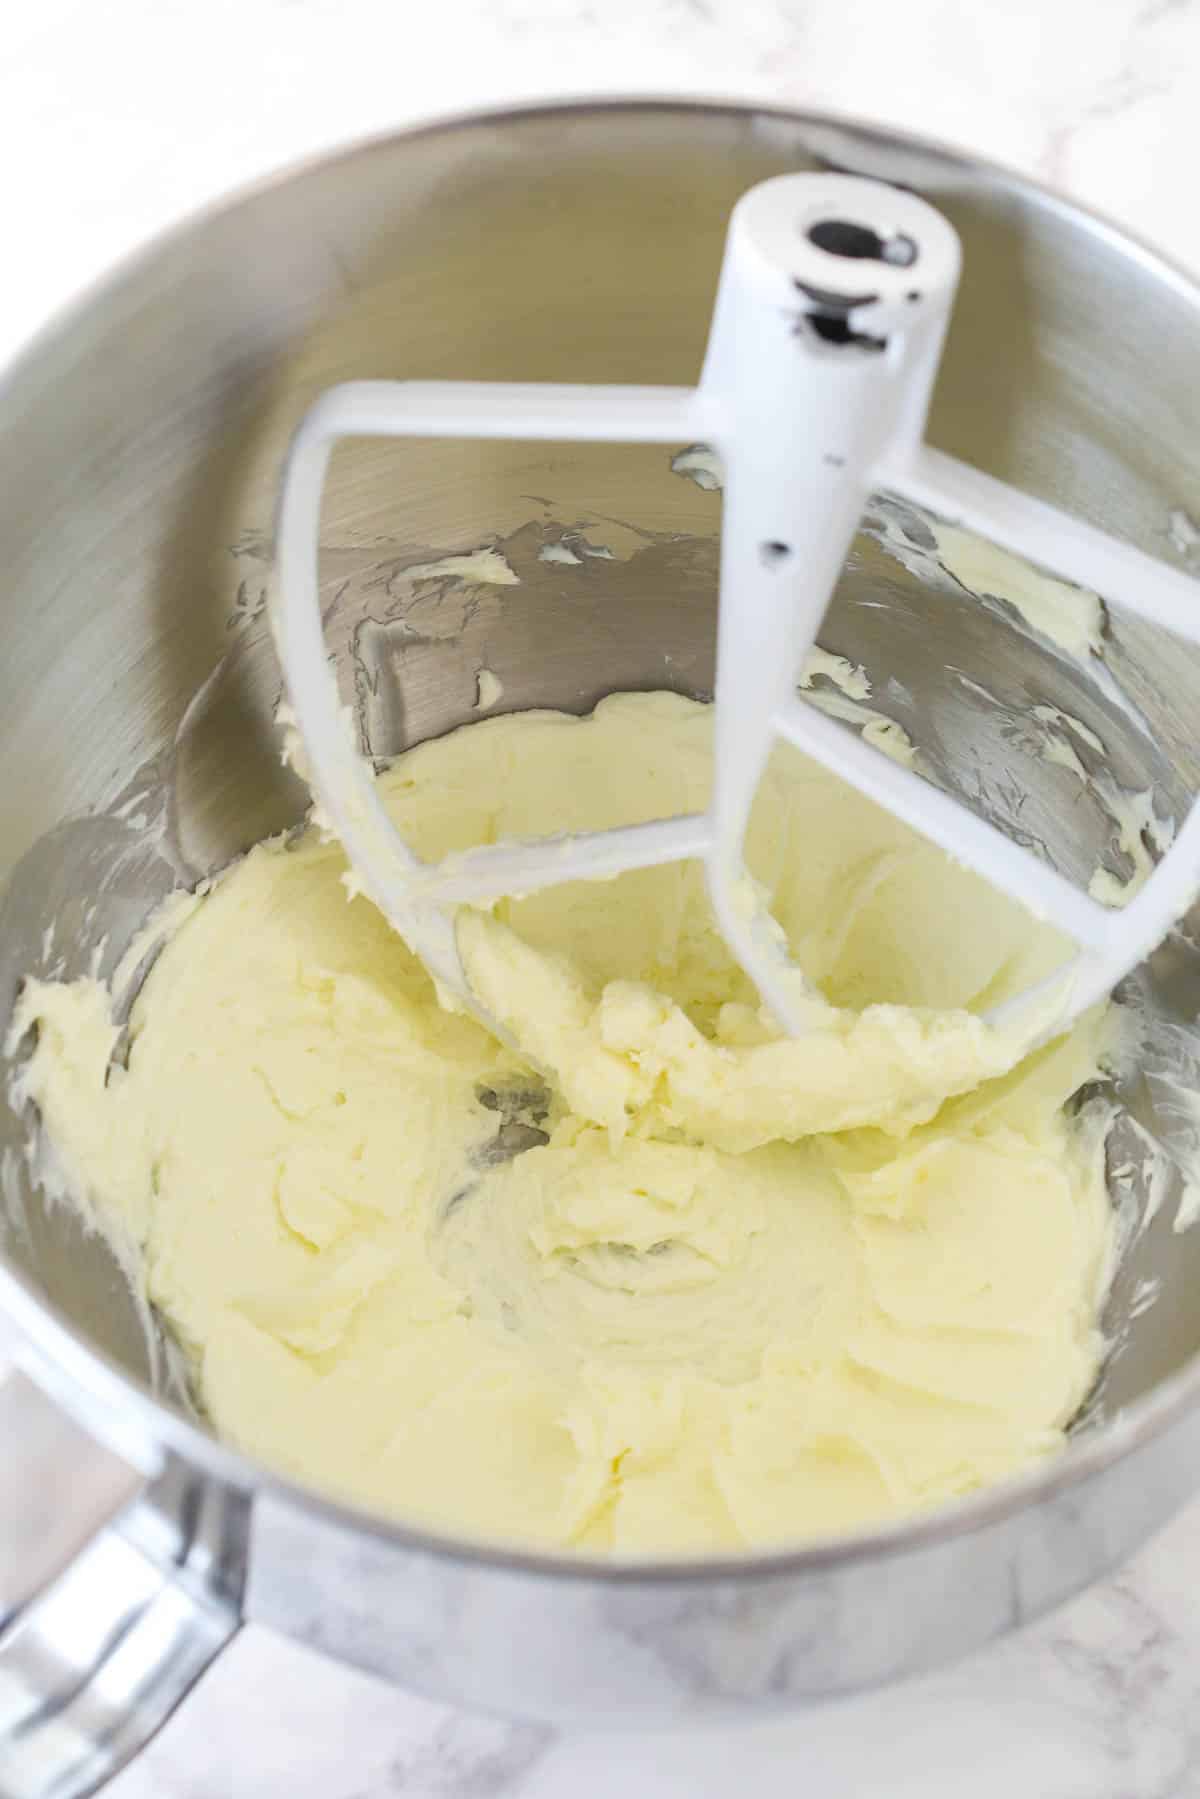 Creaming butter and cream cheese together